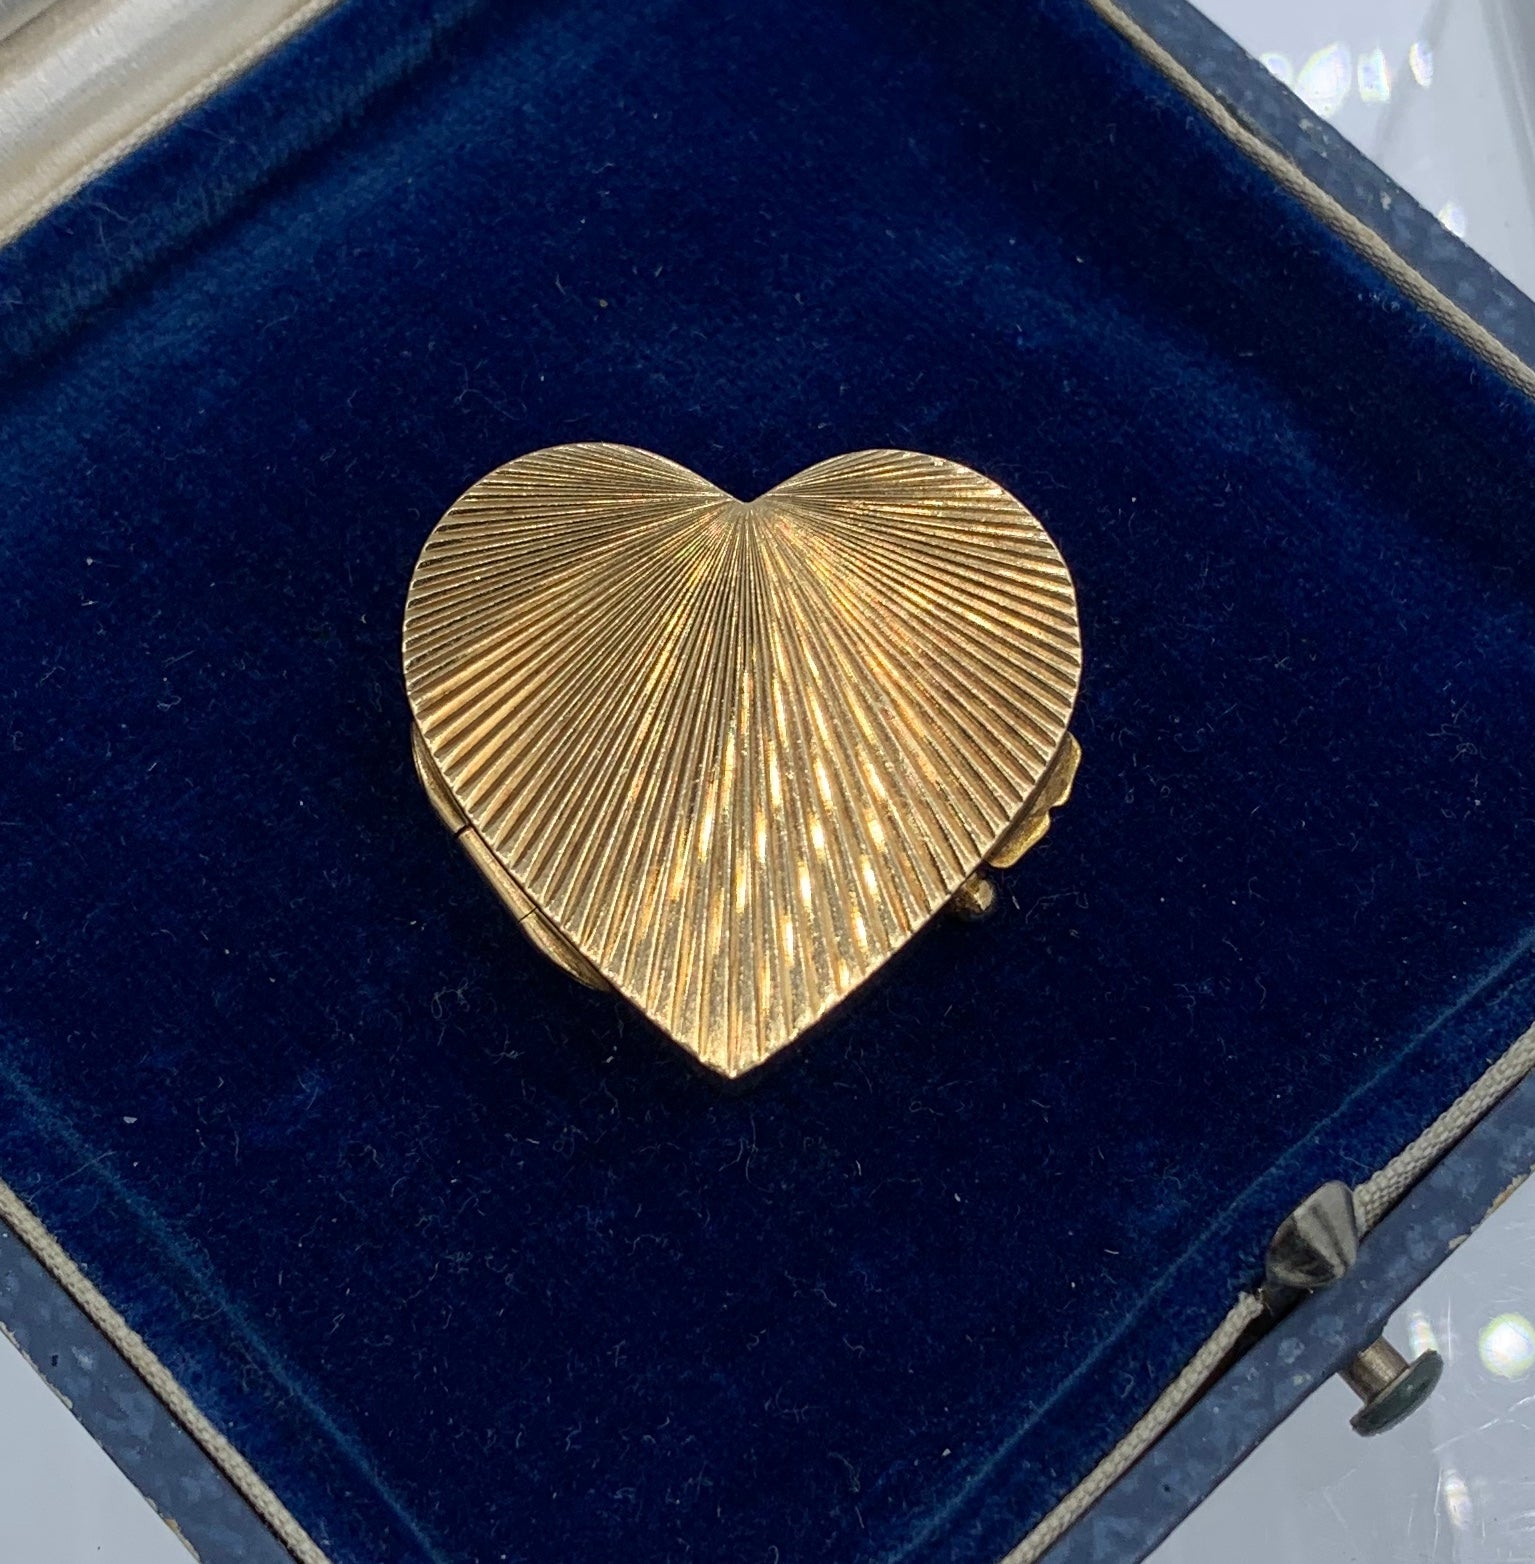 THIS IS A WONDERFUL ANTIQUE SOLID 14 KARAT YELLOW GOLD HEART SHAPE BOX WITH AN ENGINE TURNED RADIATING RAYS DESIGN.   THE 14K GOLD BOX IS PERFECT FOR YOUR TREASURED JEWELRY, KEEPSAKES, OR PILLS.
We are so thrilled to have found the most elegant